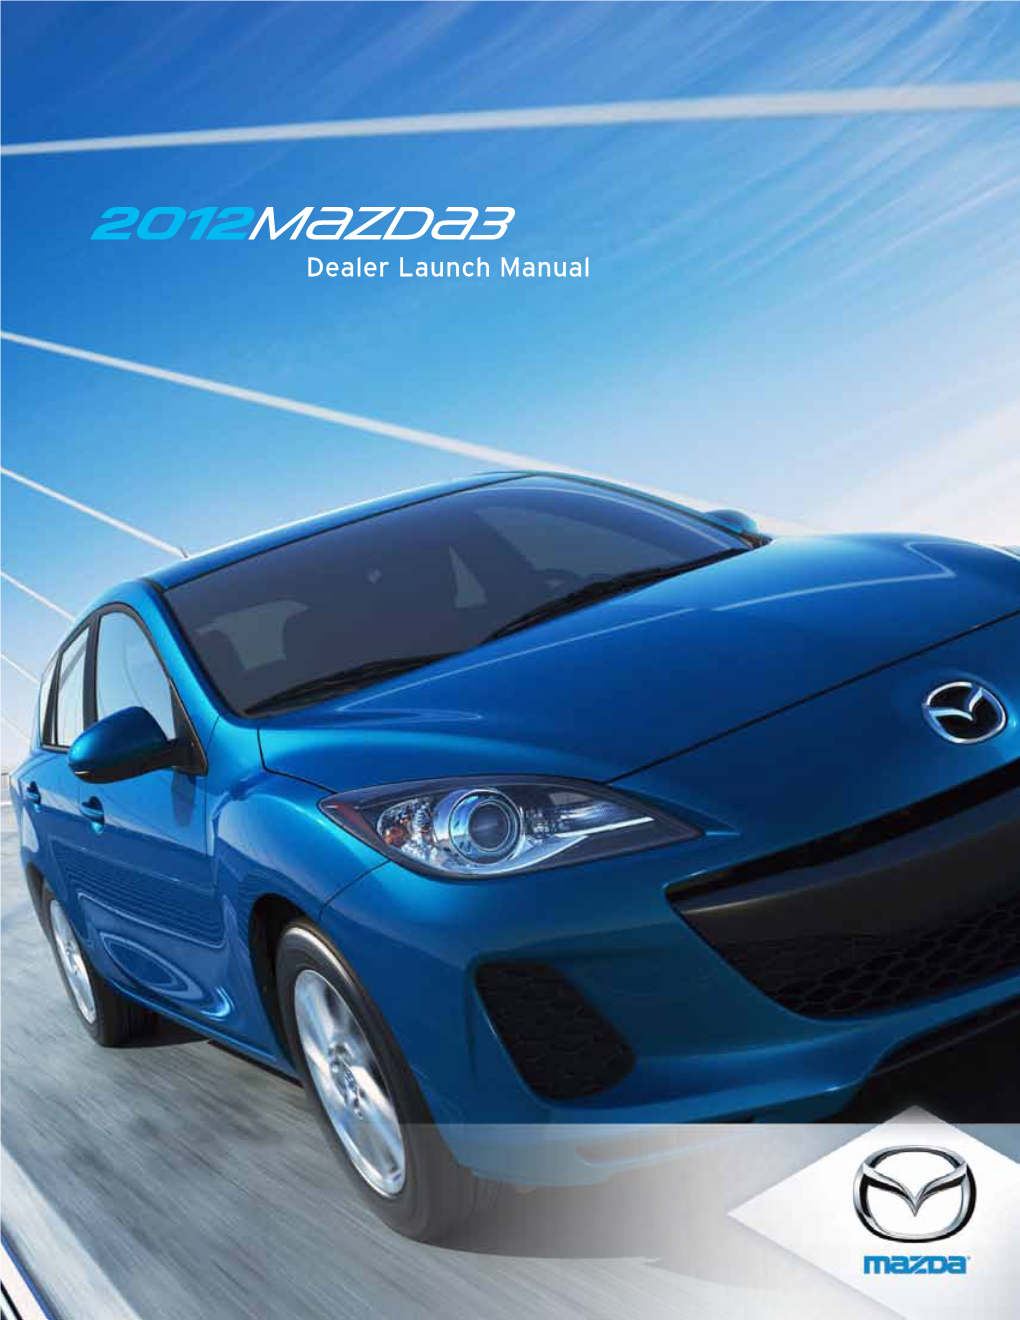 2012M{Zd{3 Dealer Launch Manual You Belong to a Brand That Is Making History